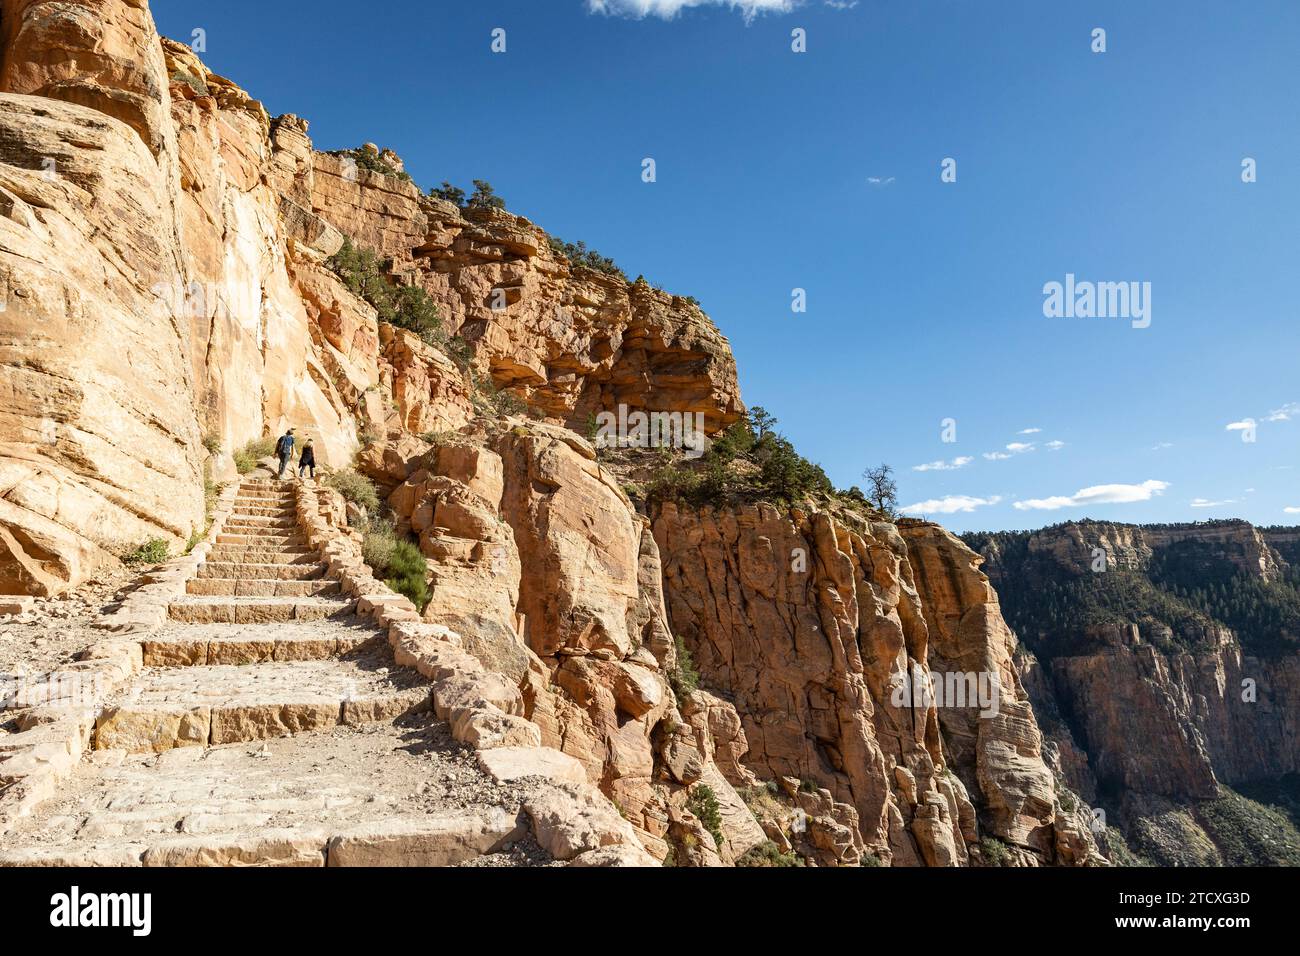 South Kaibab Trail ascent from Ooh Aah Point back to Kaibab Rim, Grand Canyon, AZ, USA Stock Photo